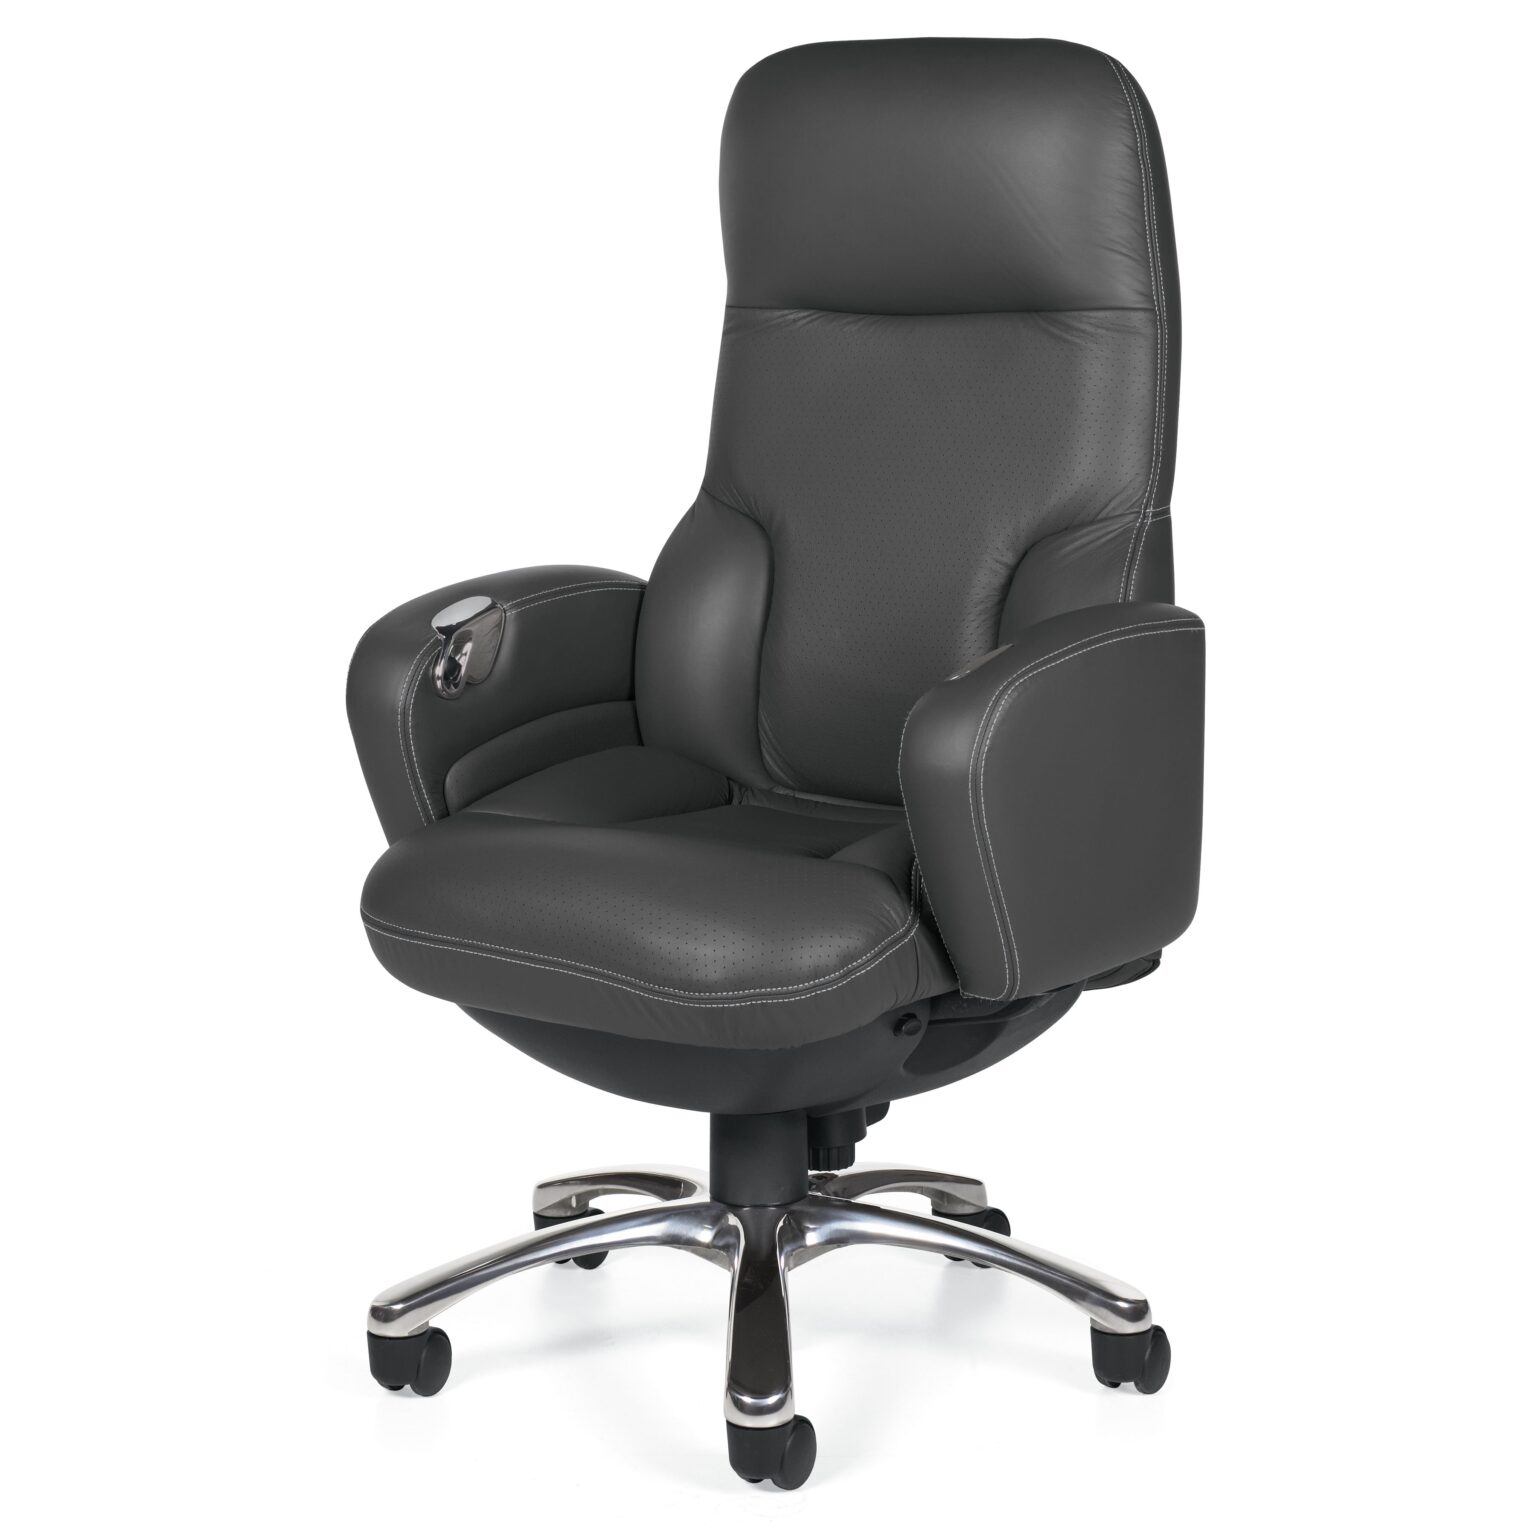 global-executive-office-chairs-intended-for-current-global-furniture